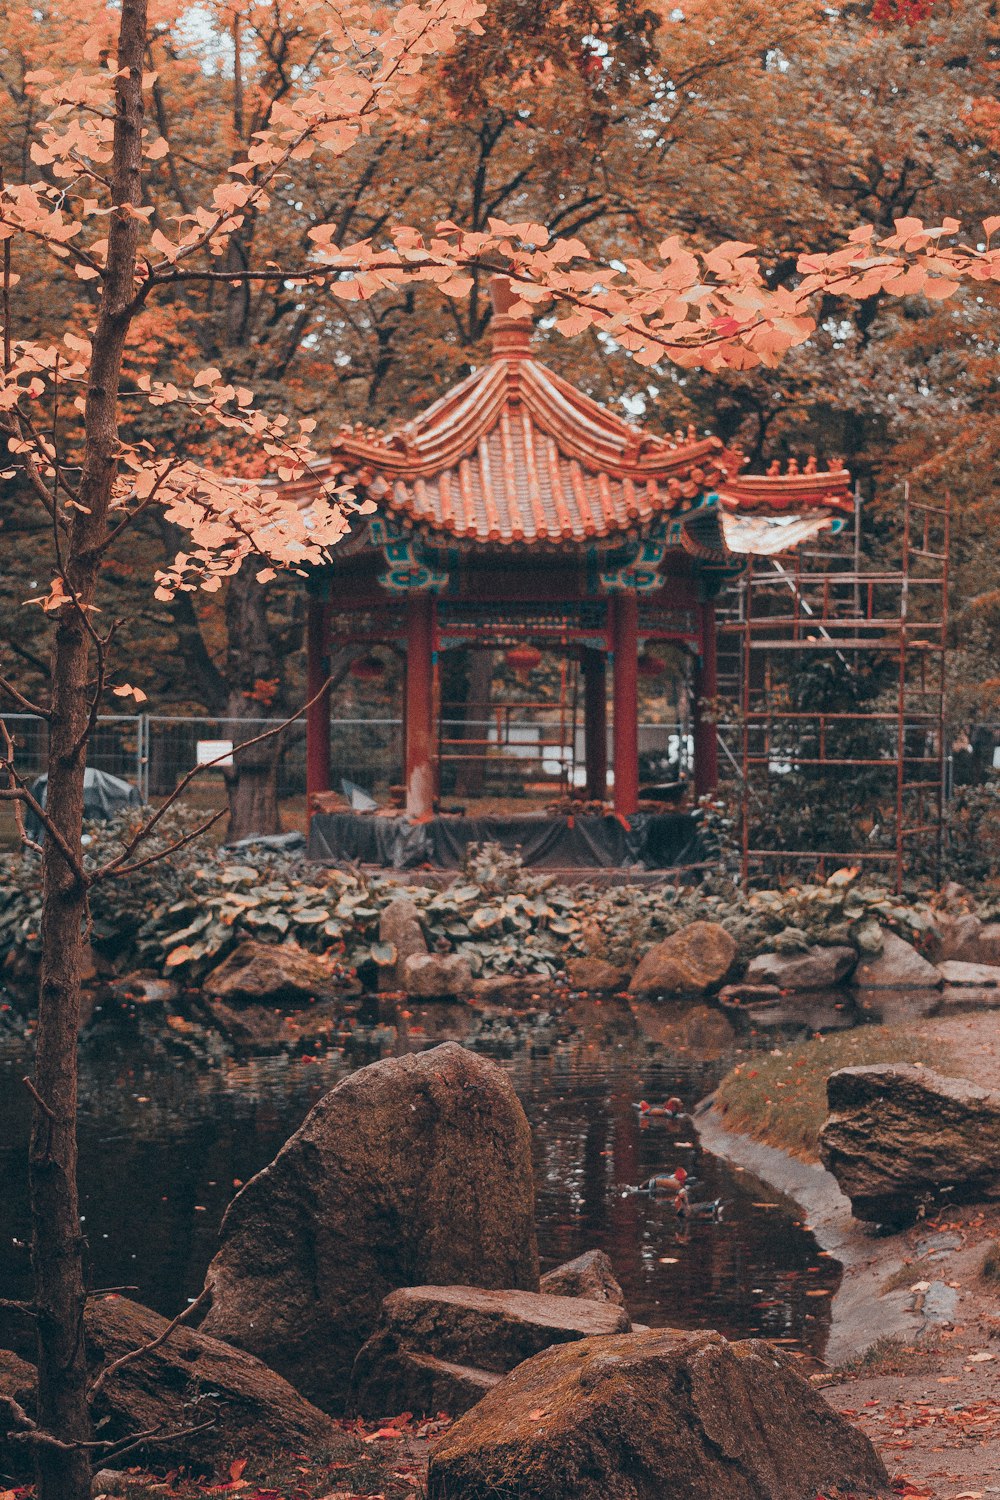 a small pagoda in the middle of a forest